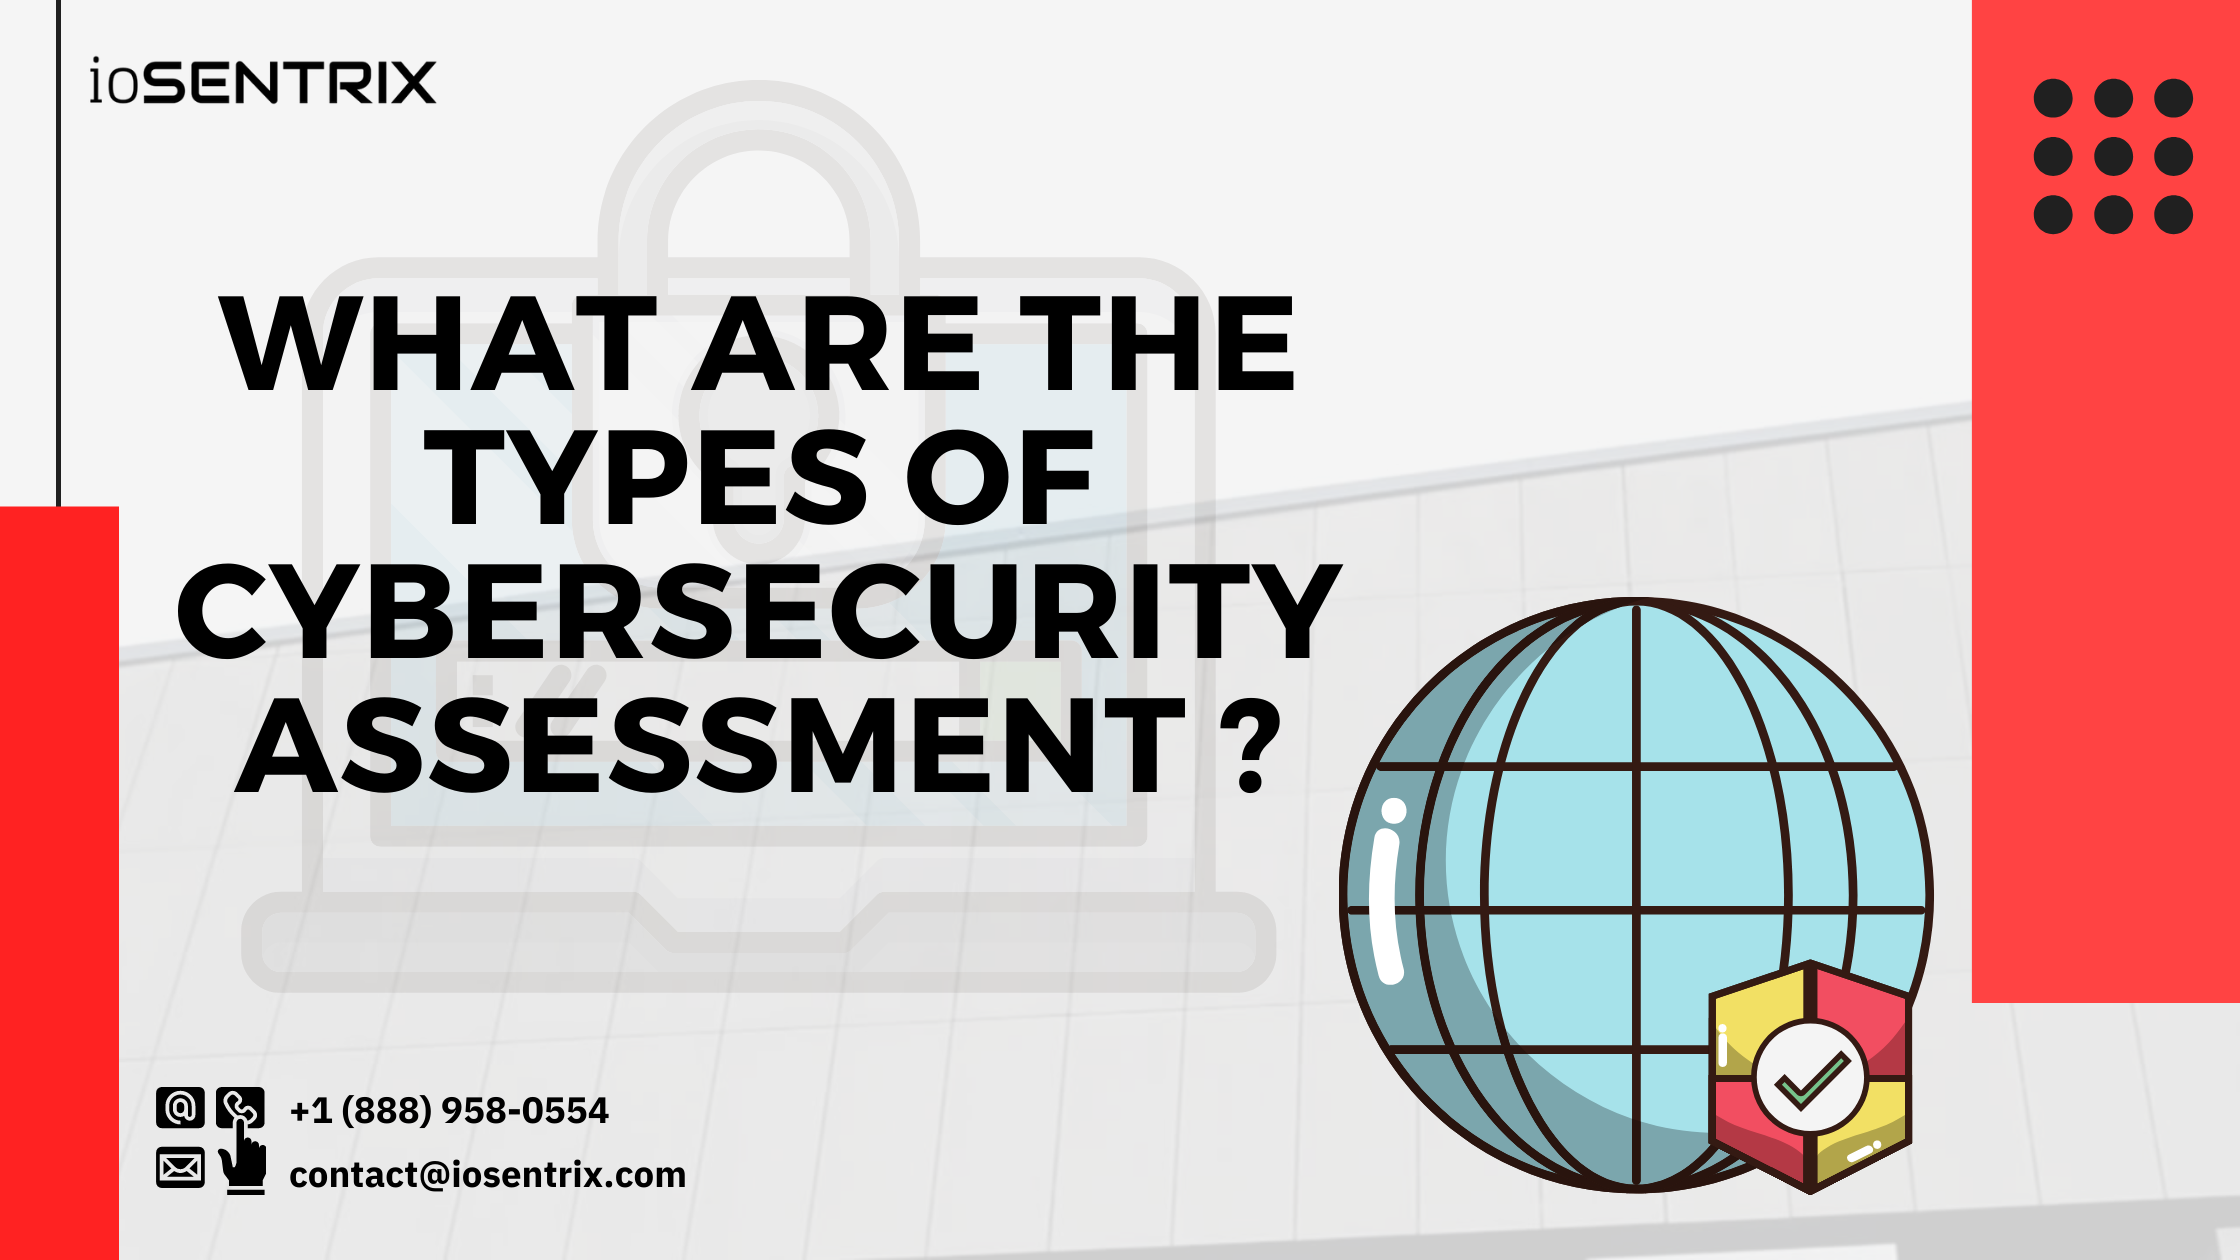 What is cybersecurity assessment, and what are the types of cybersecurity assessment?